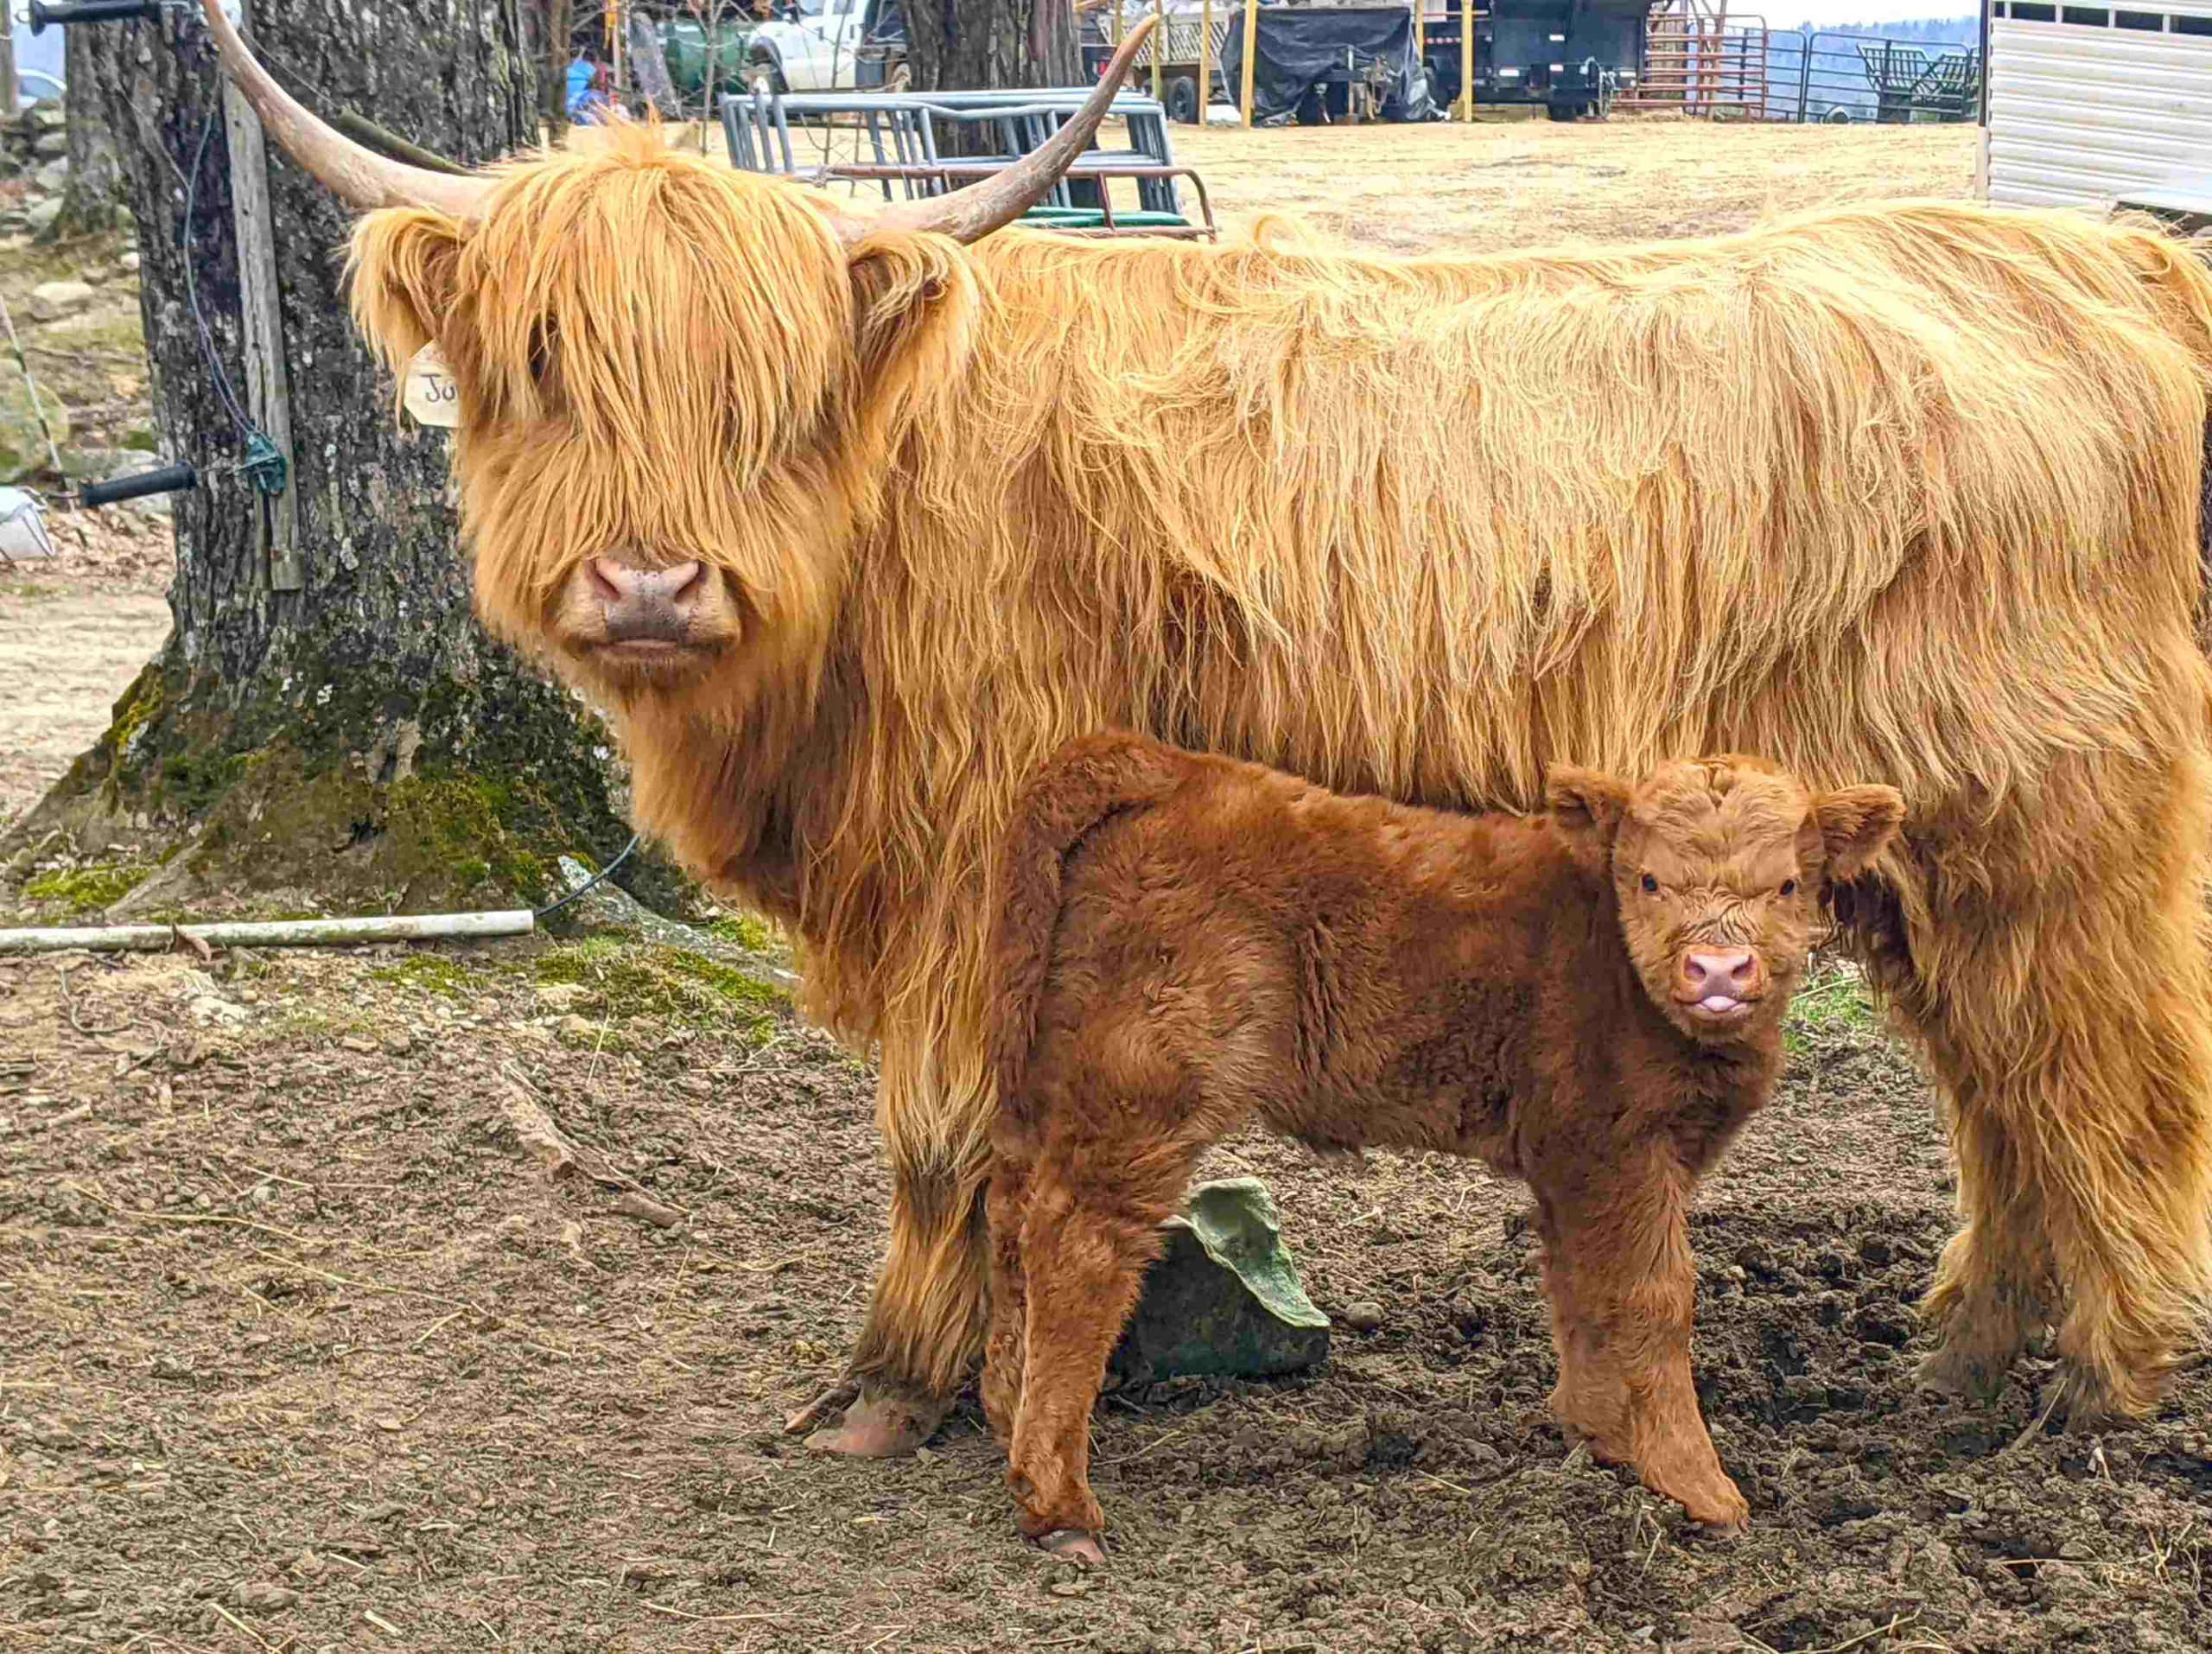 June and her calf, Dolly